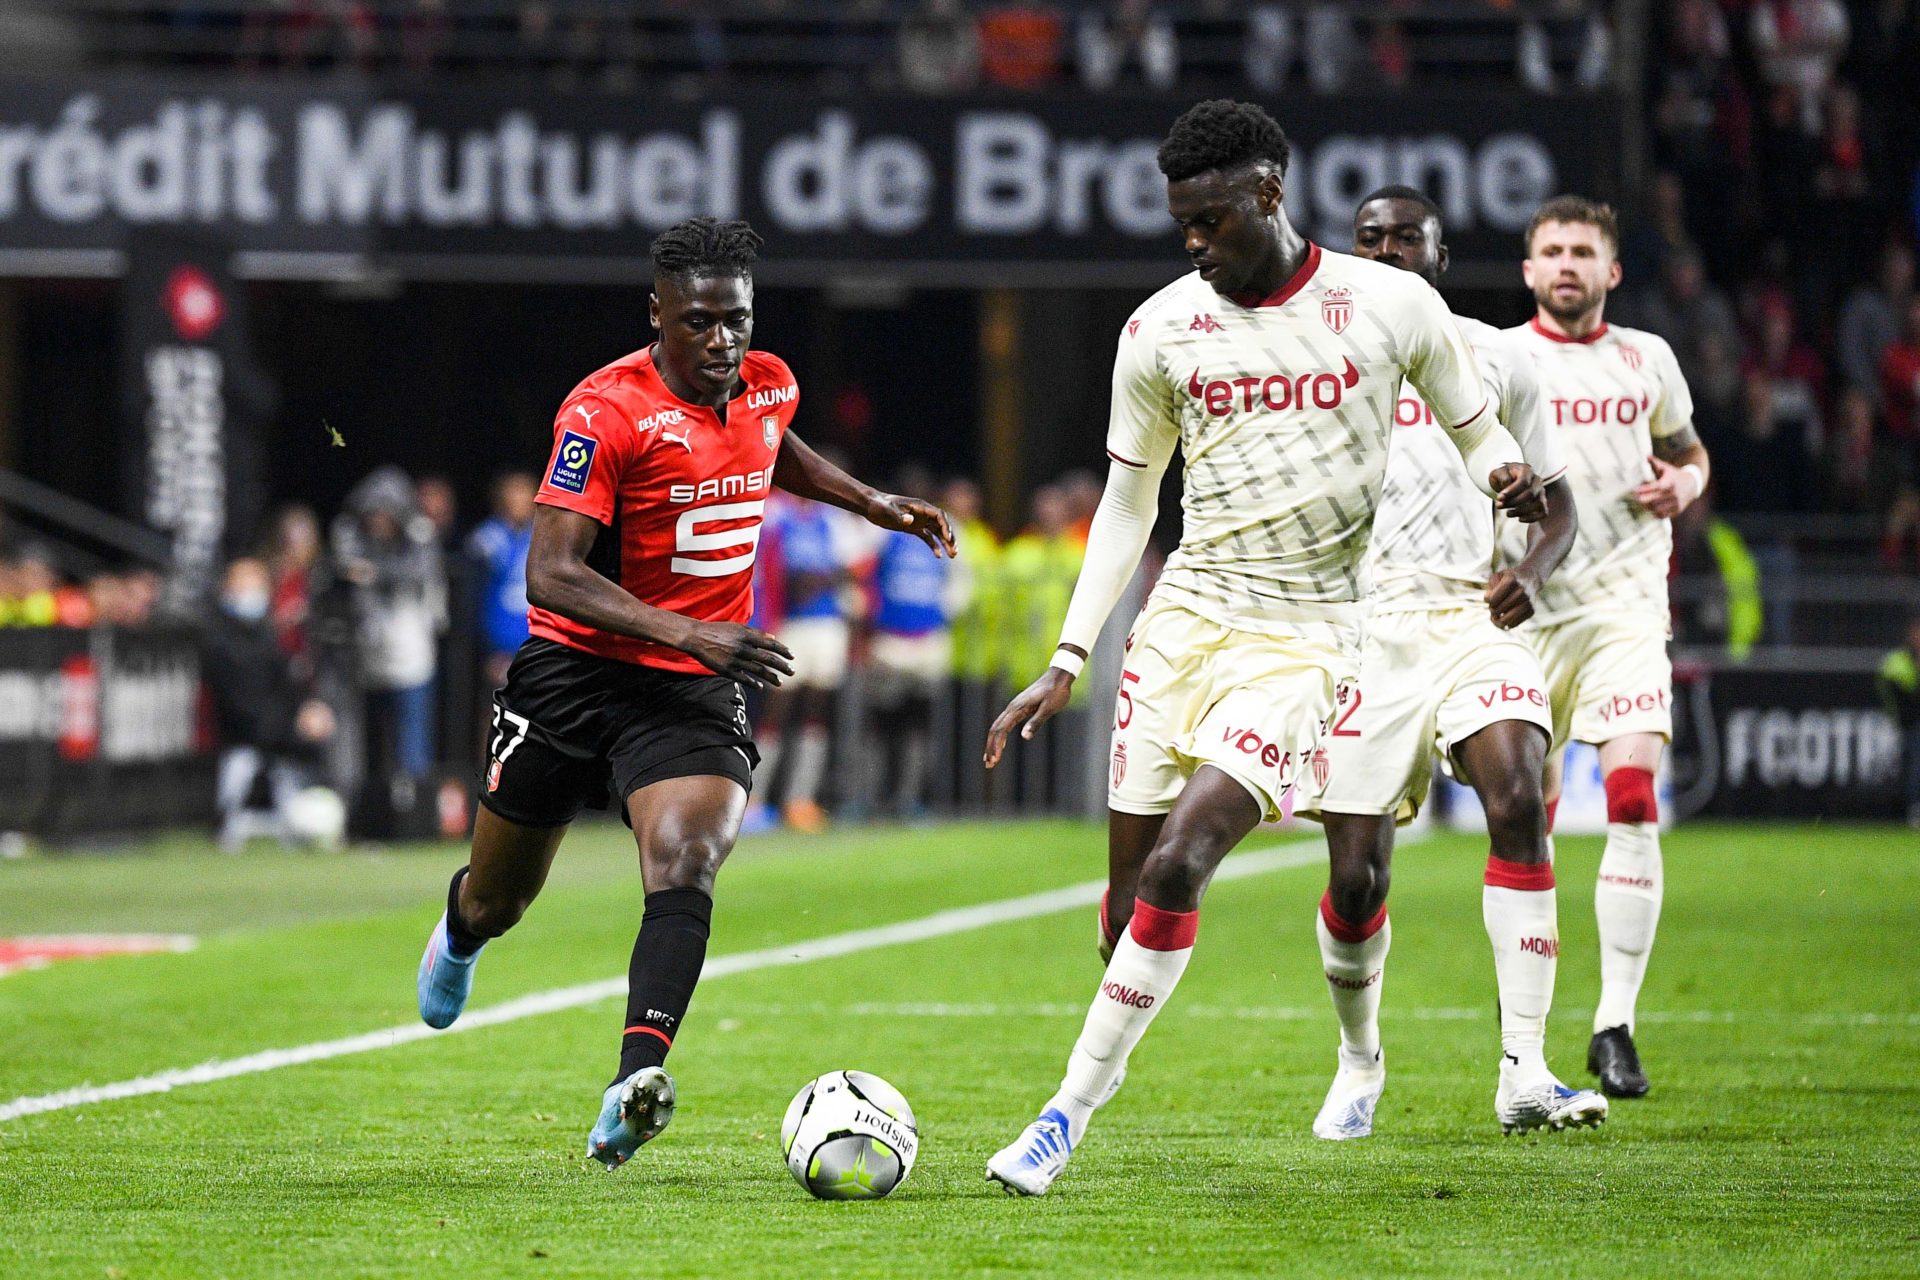 West Ham are reportedly eyeing a move to sign Benôit Badiashile from Monaco in the summer